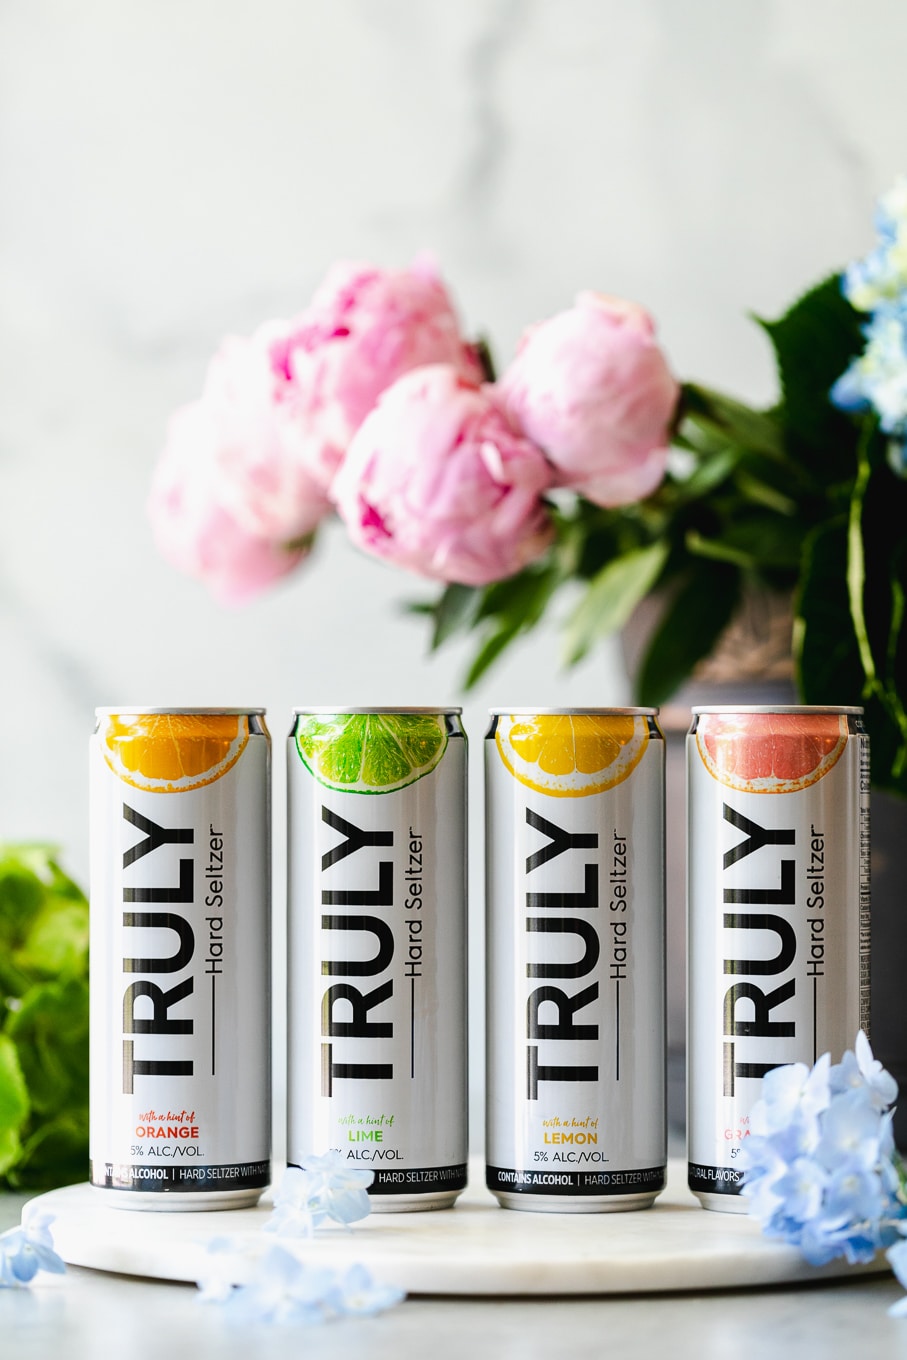 Shot of 4 cans of hard seltzer with flowers in the background